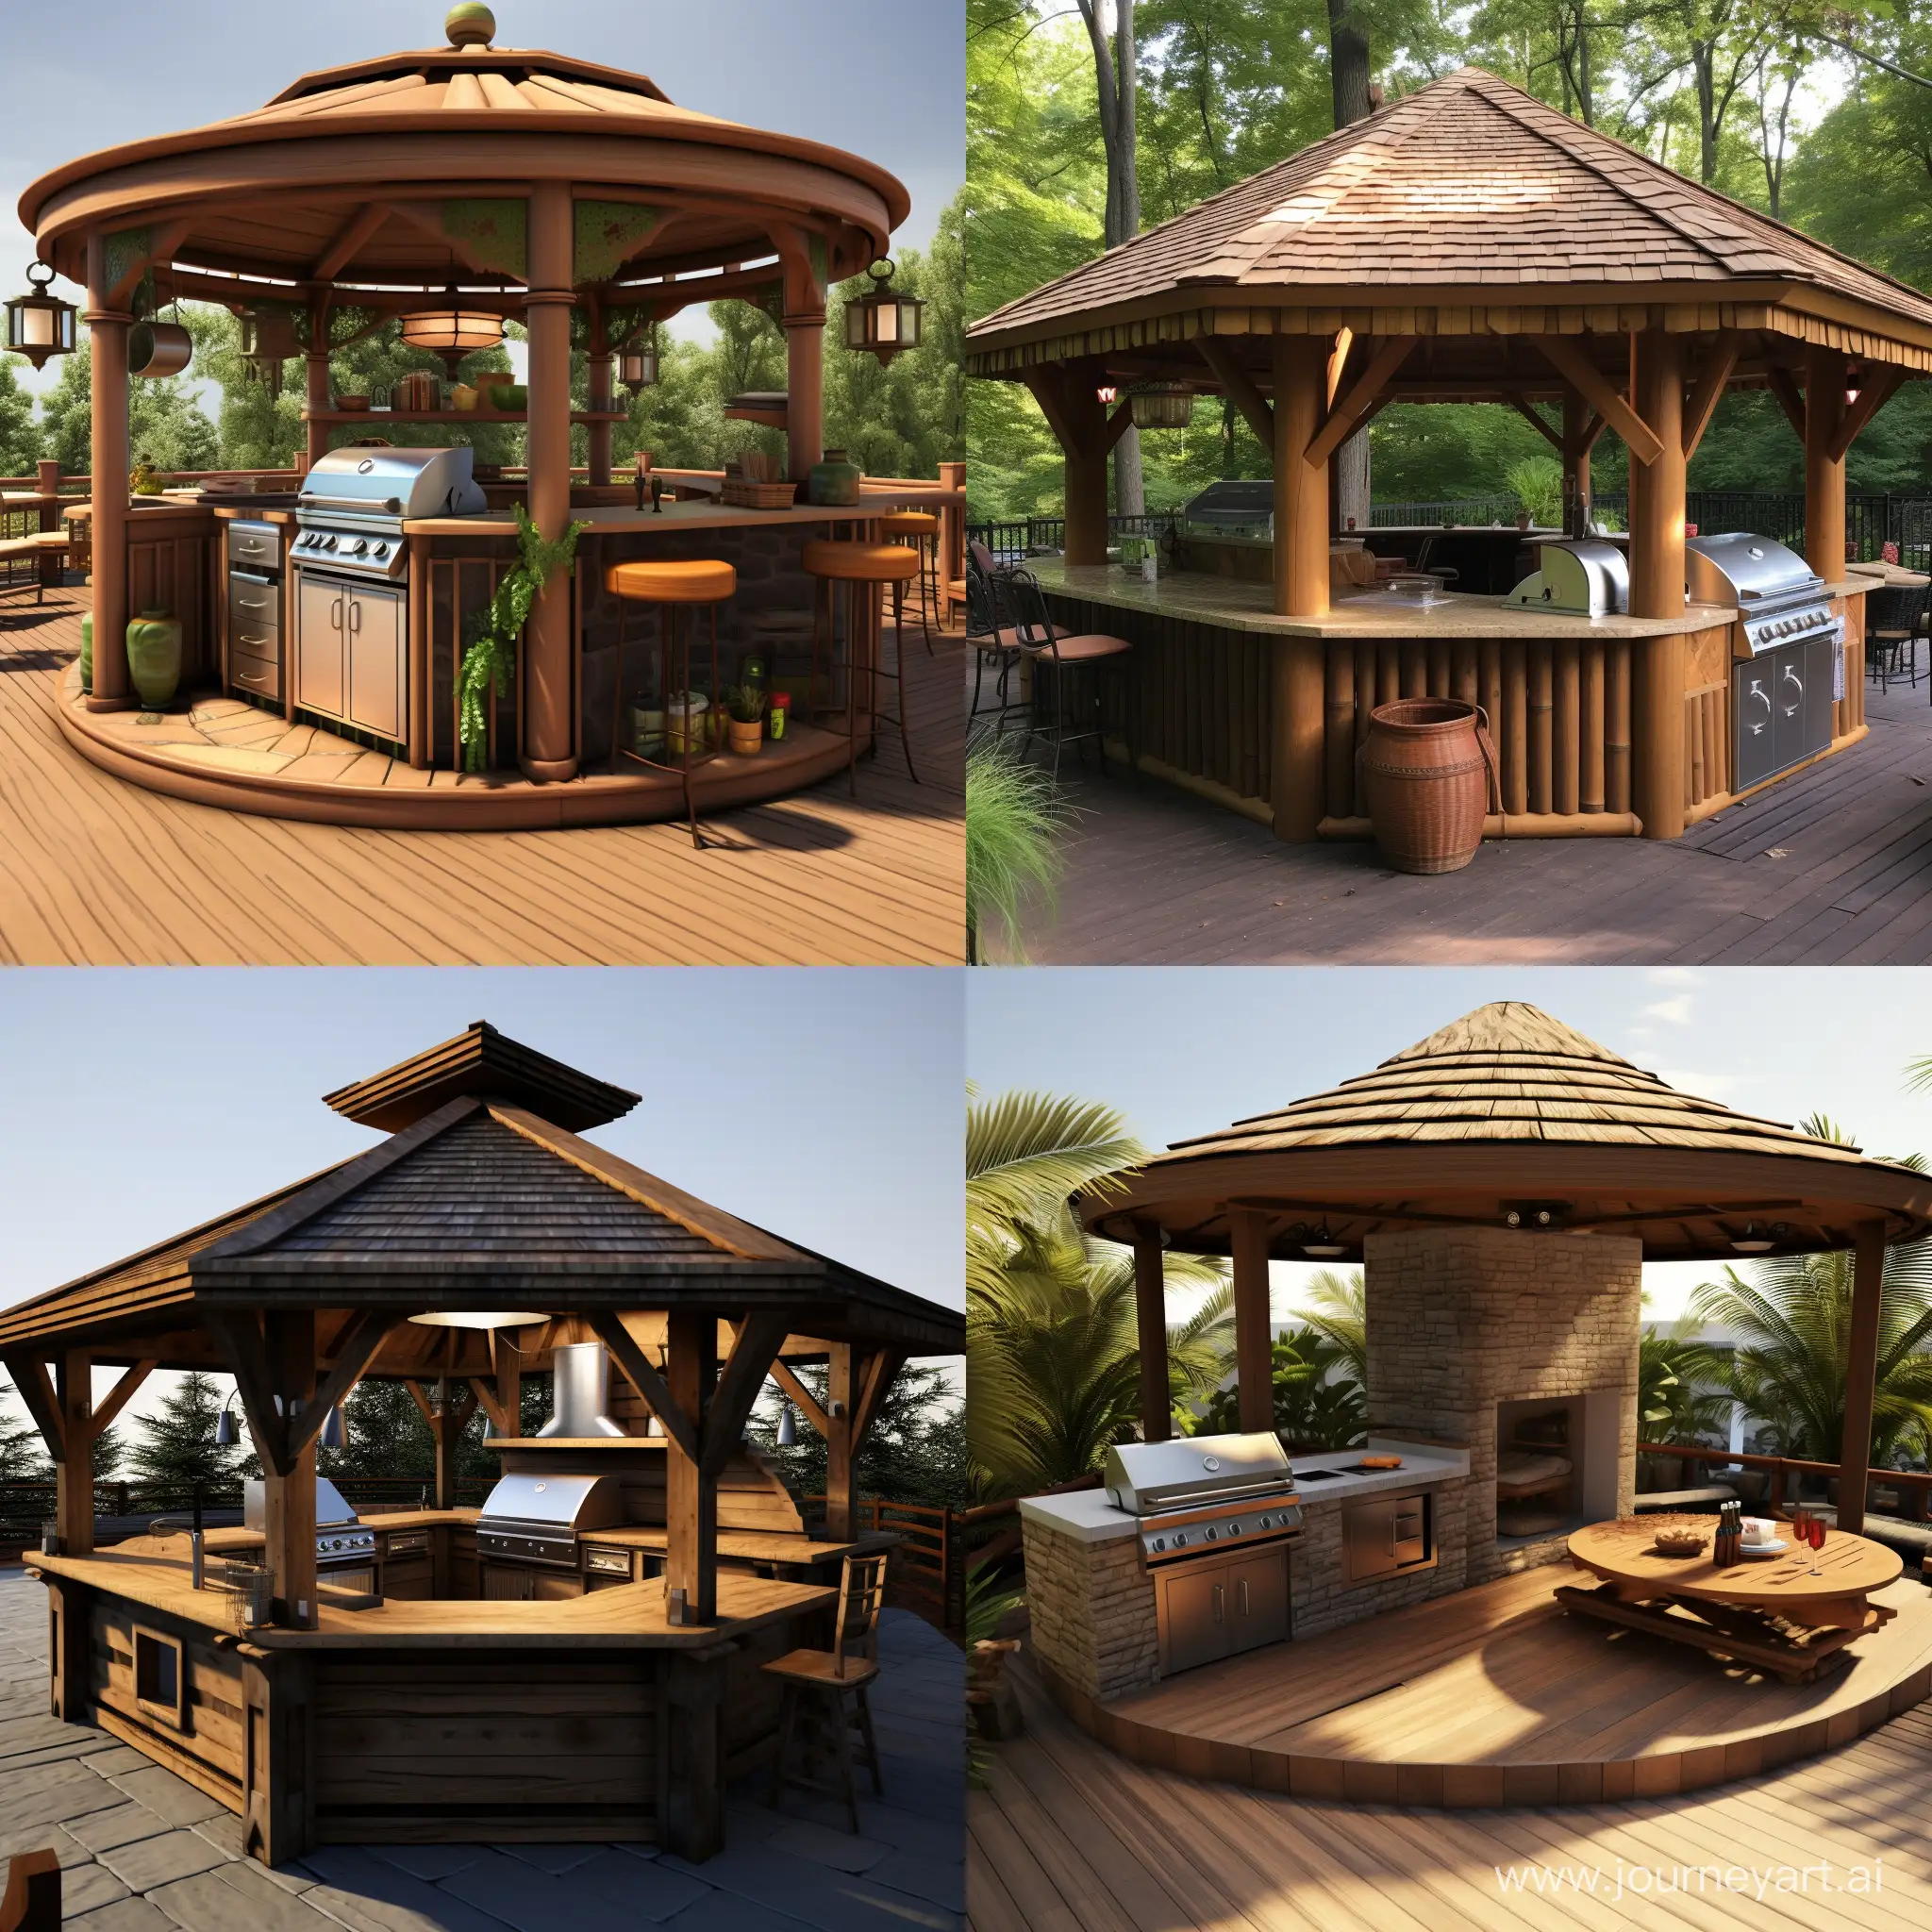 Outdoor Gazebo kitchen with only Grill and sink of size 12x12. Please be creative